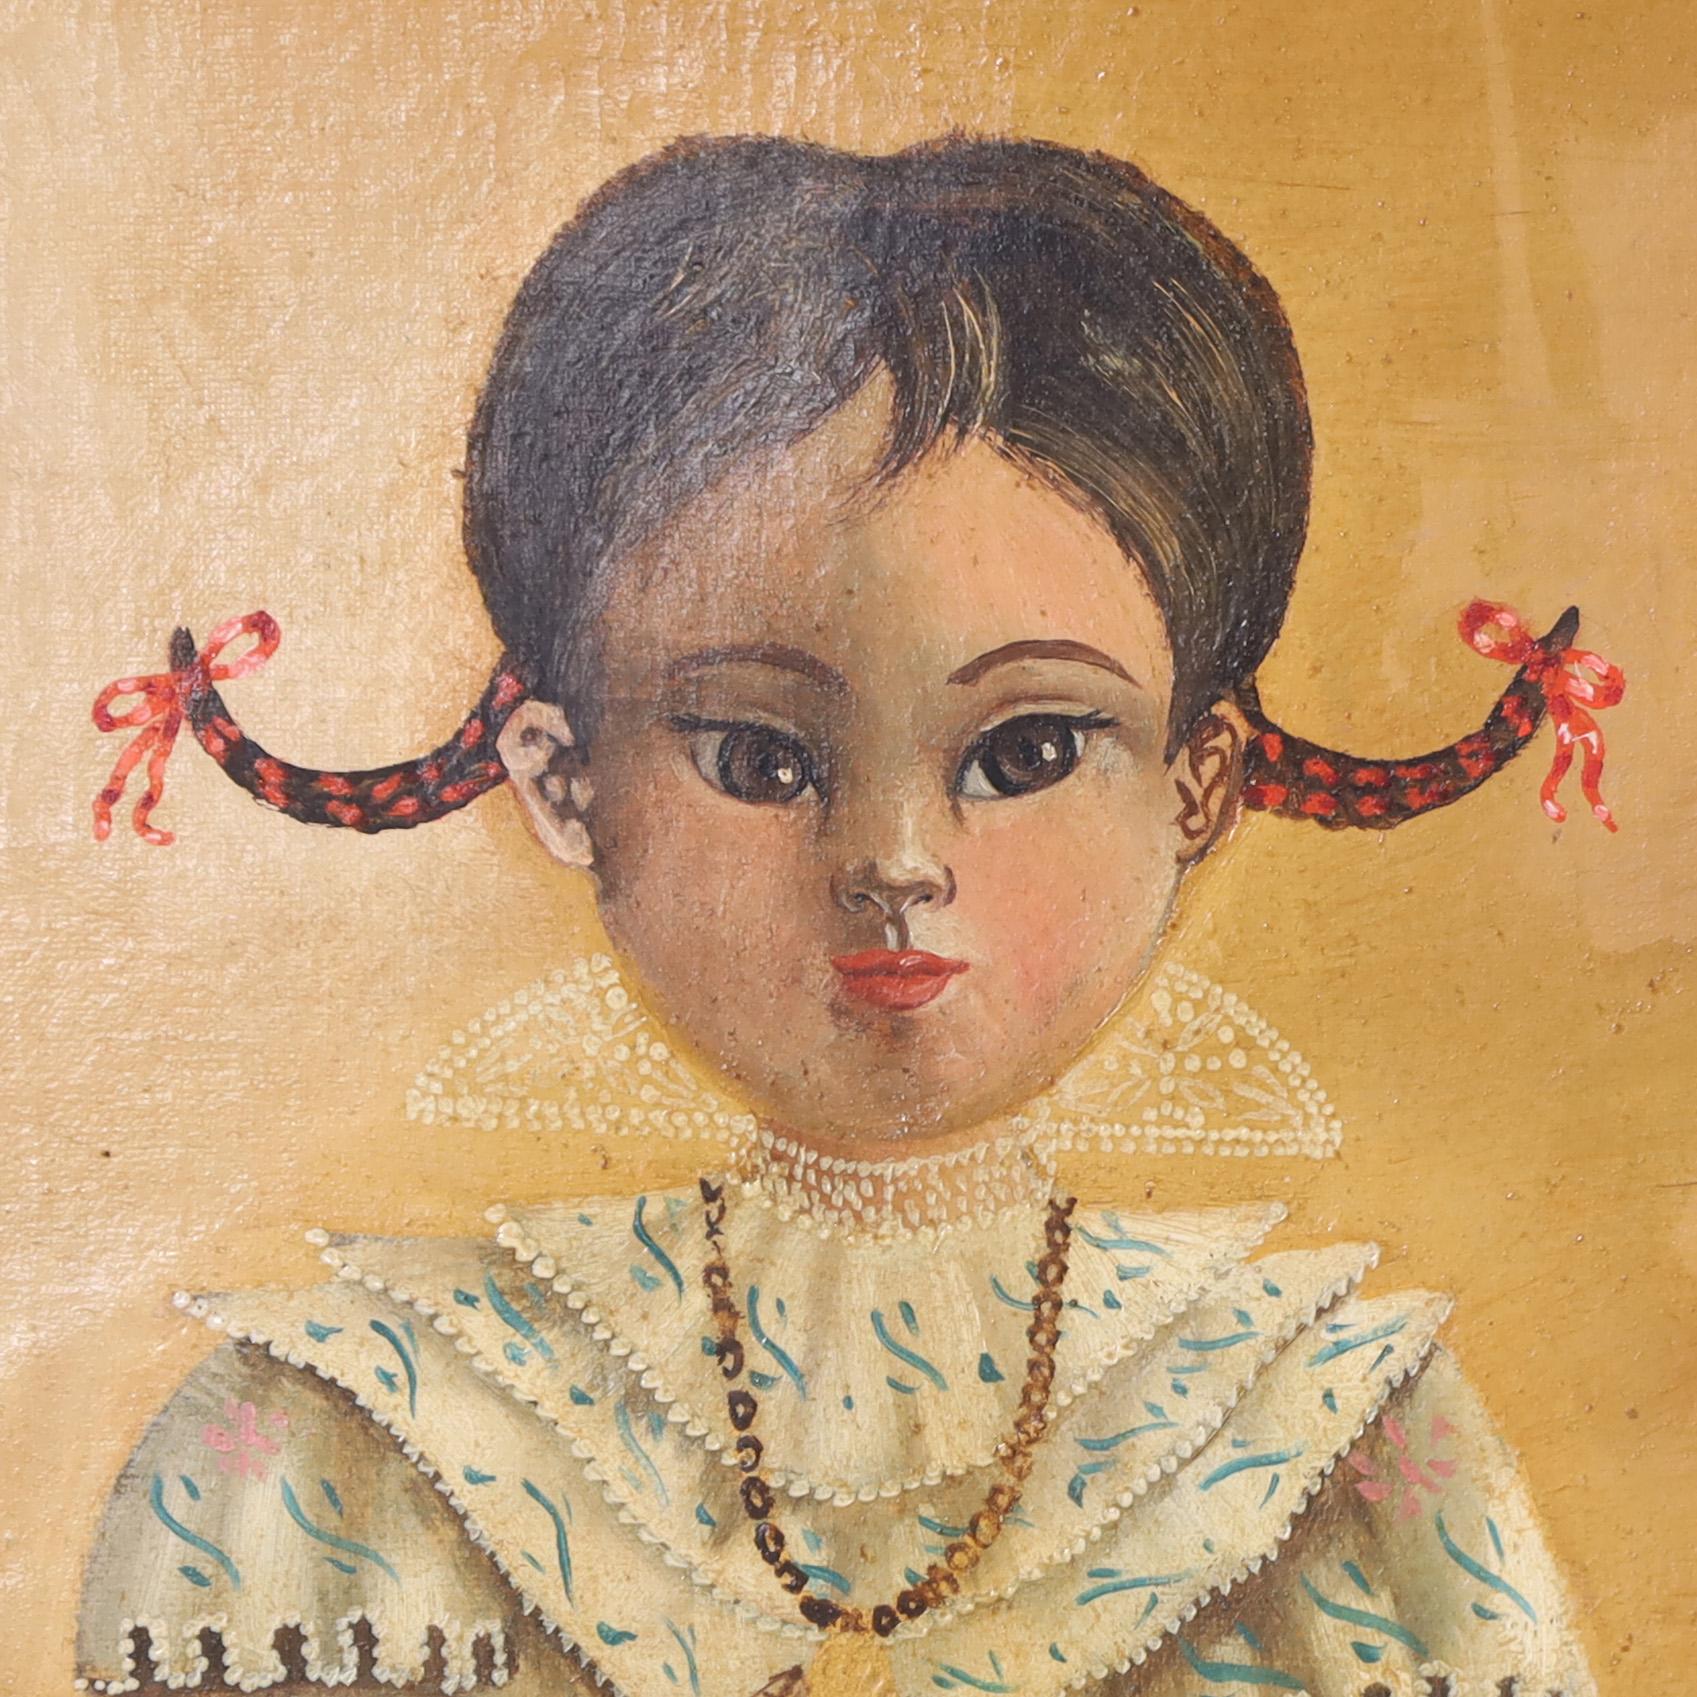 Agipito Labios Folk Art Painting of a Girl with Dogs 2